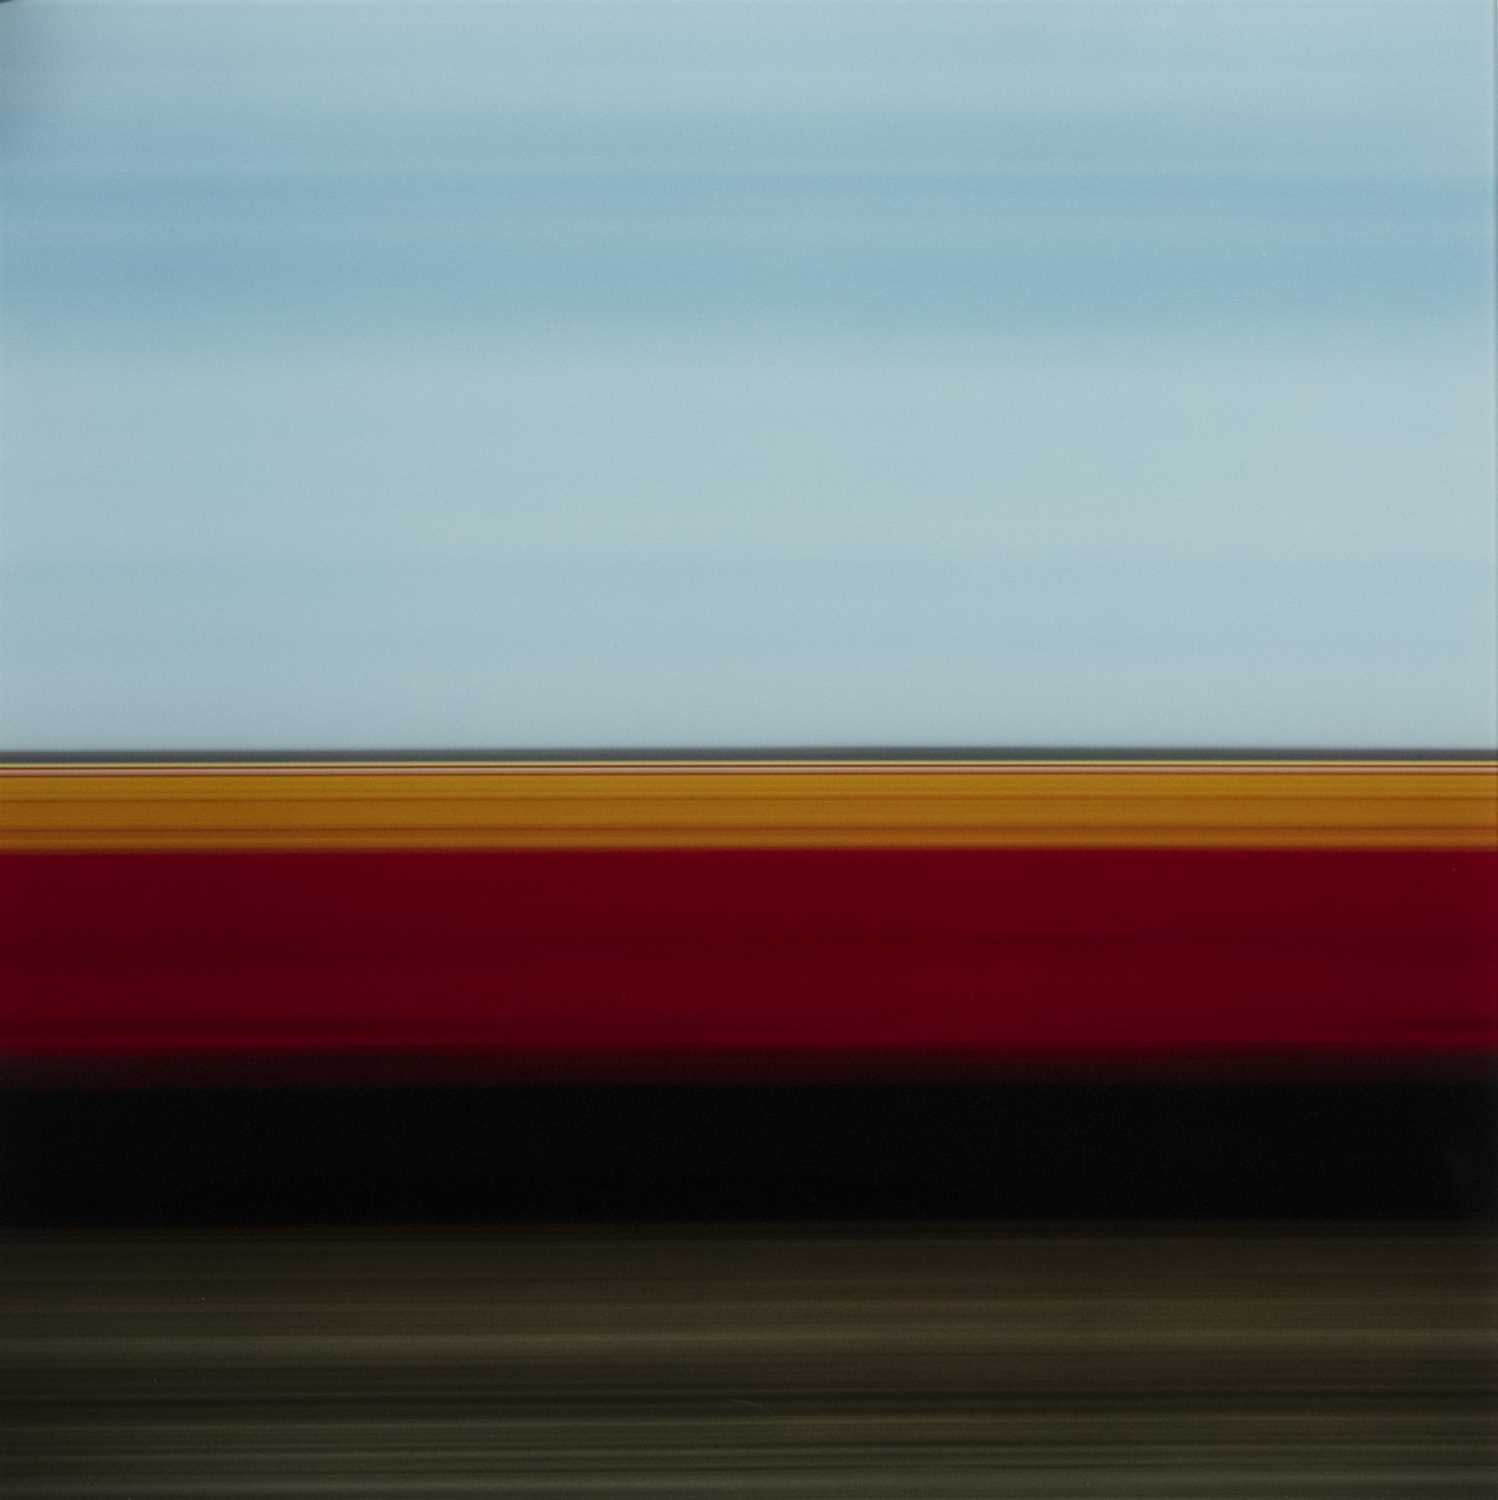 Lot 299 - TRAVELLING STILL, TULIP FIELDS III, HOLLAND 2006, A PRINT BY ROB CARTER